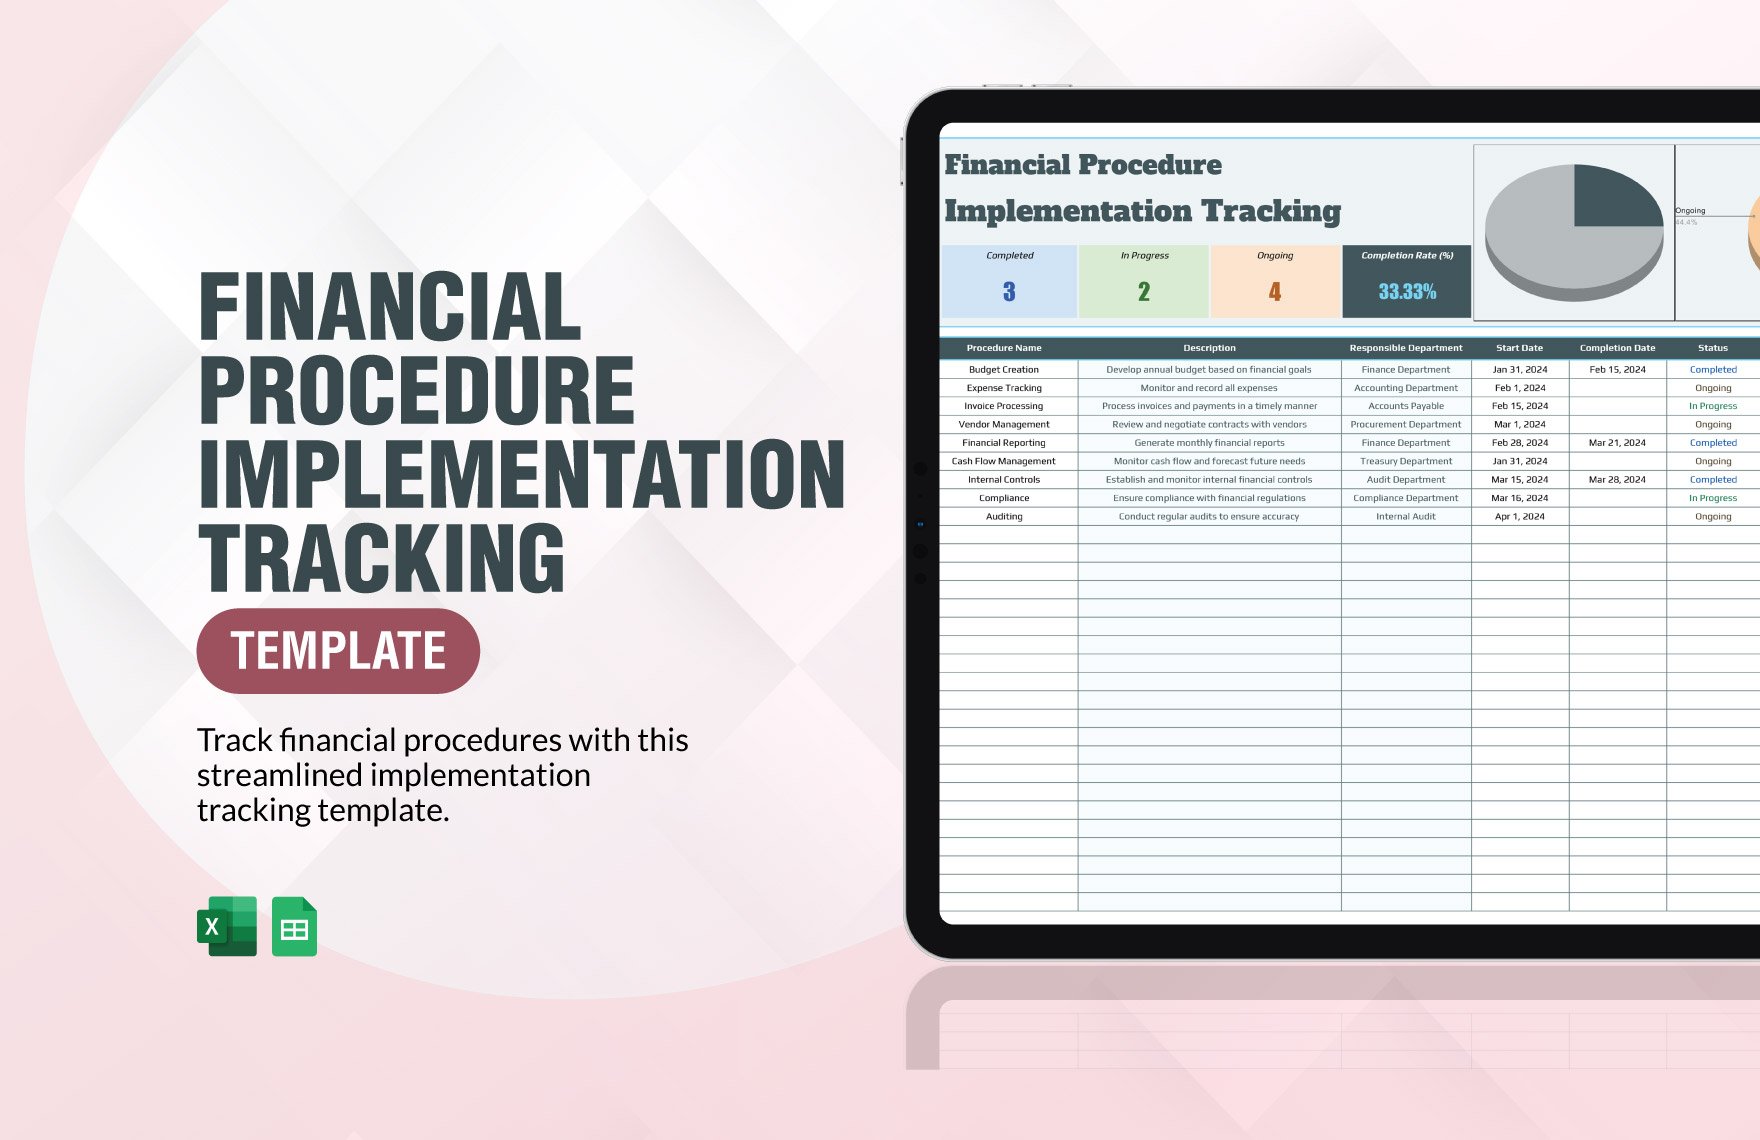 Financial Procedure Implementation Tracking Template